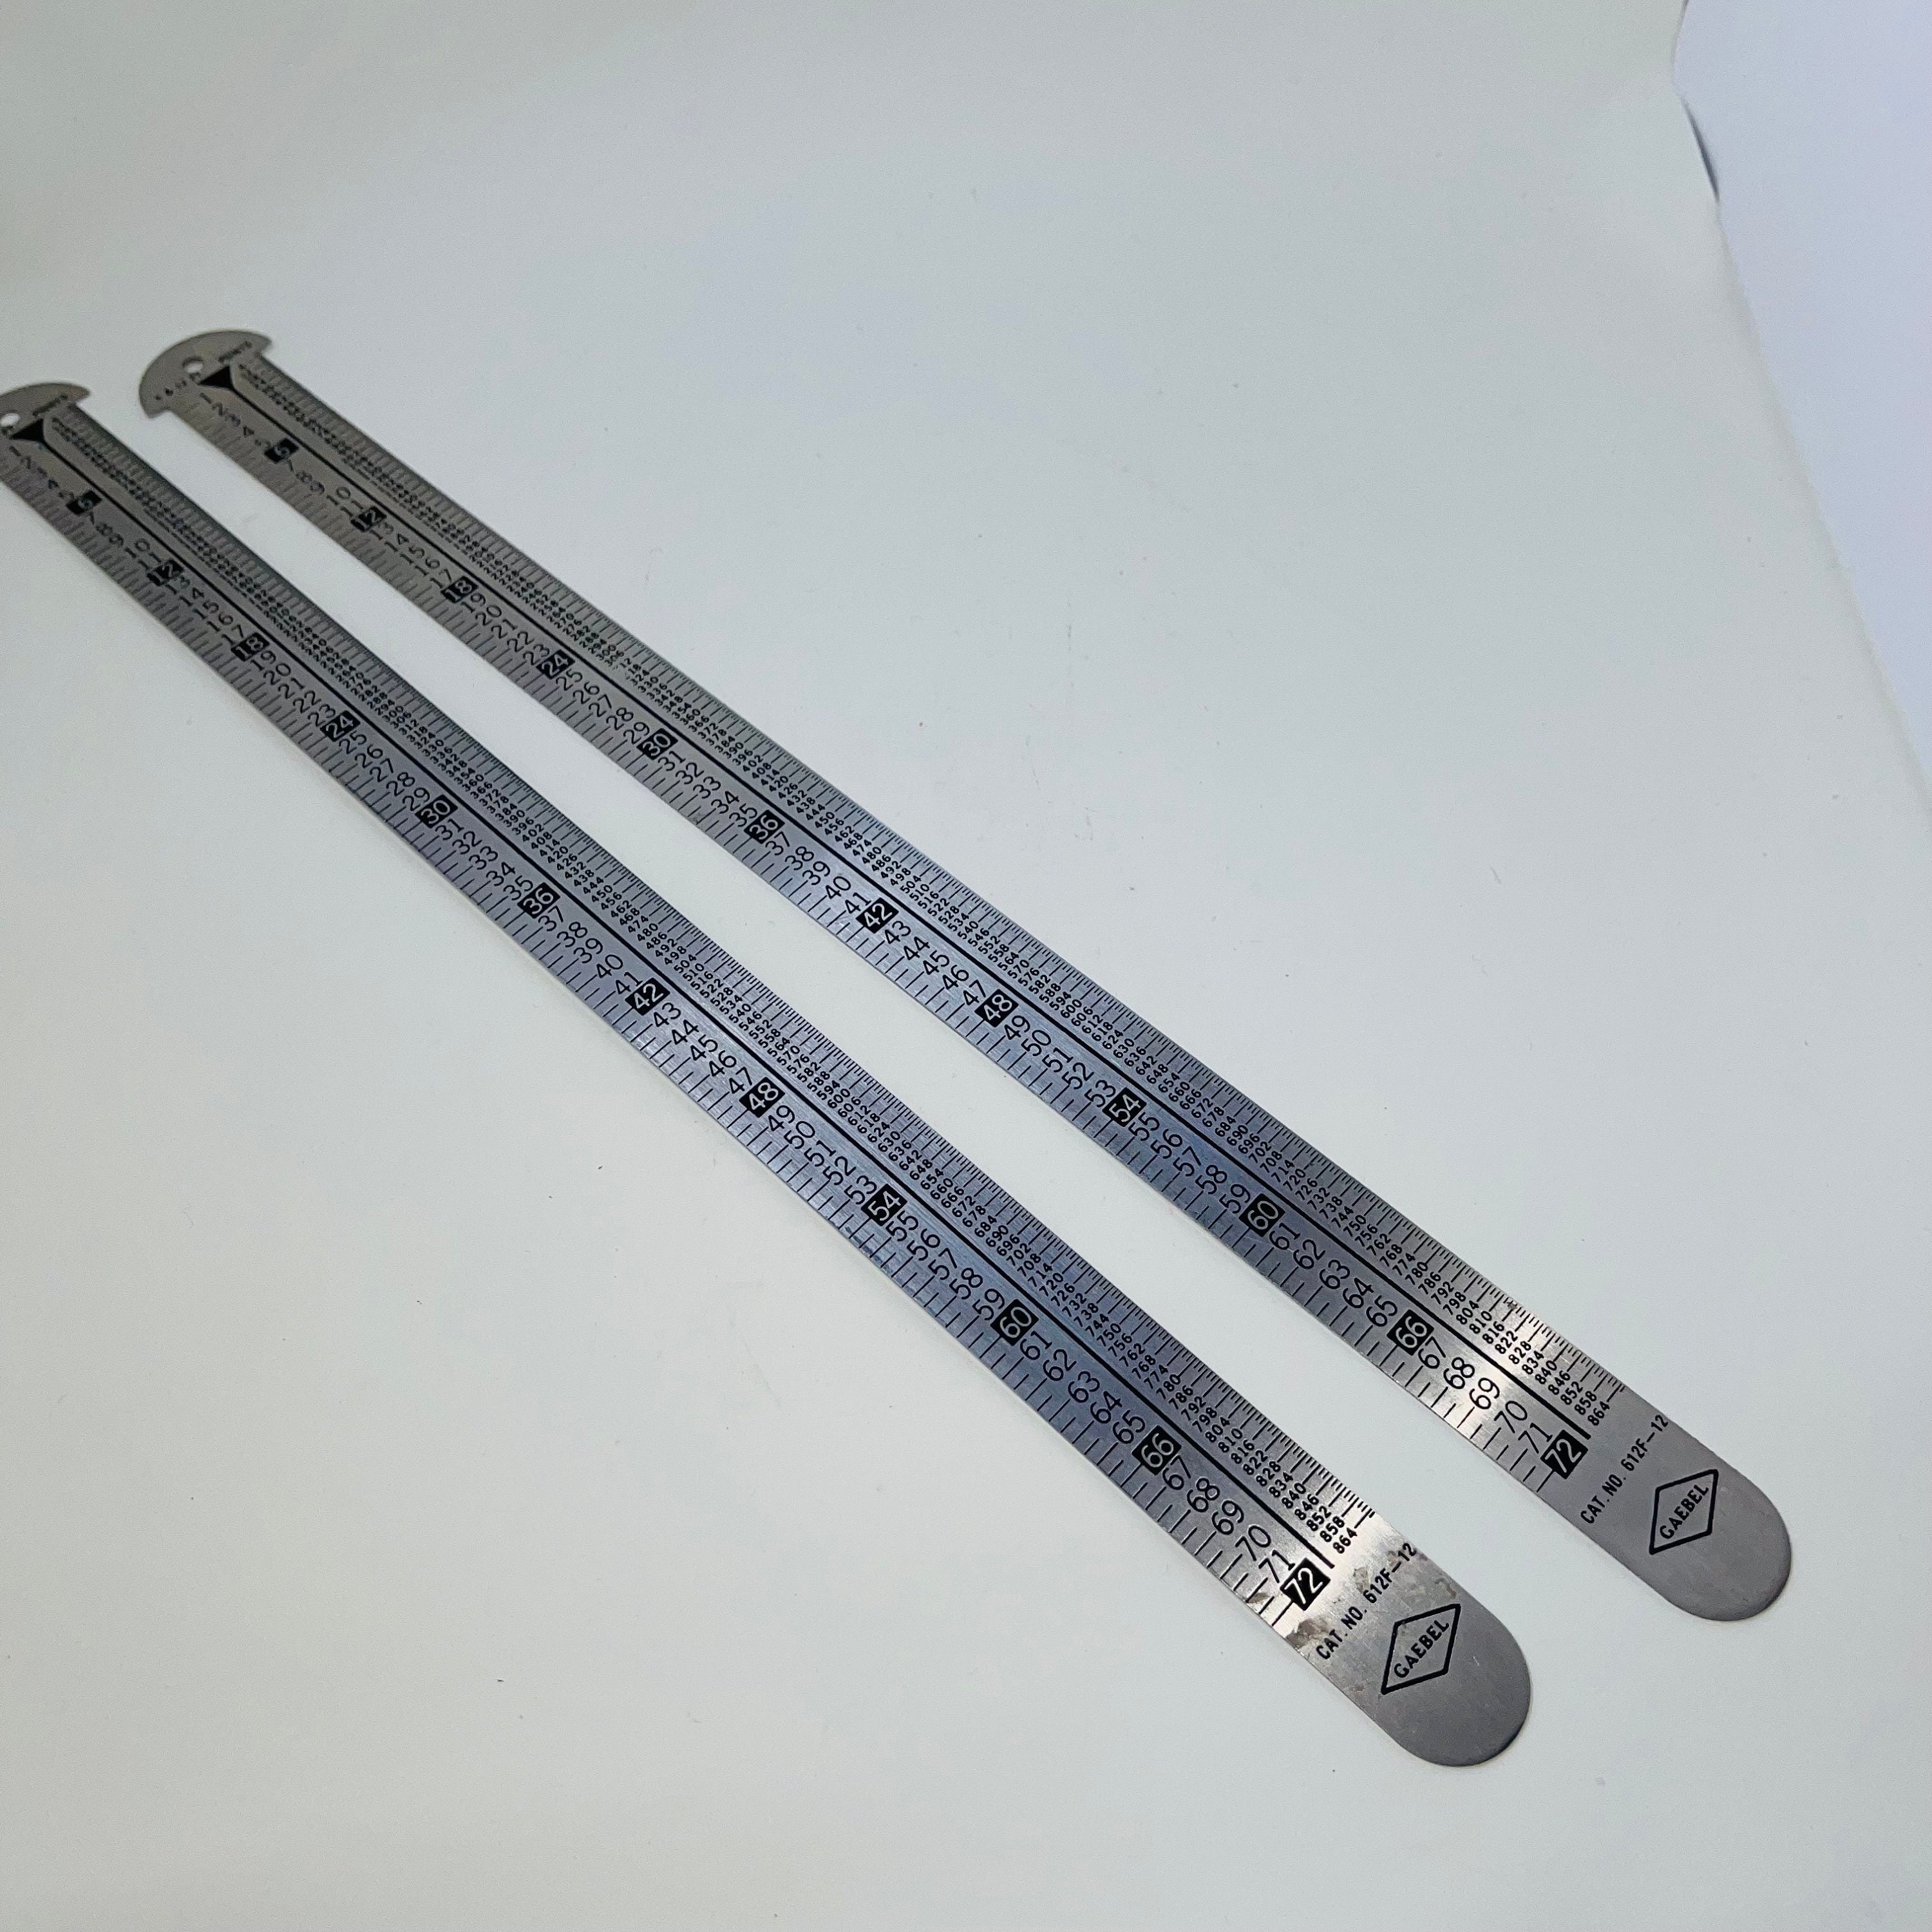 Creative Grids 1 Inch X 12 Inch or 1 Inch X 6 Inch Clear Non-slip Rulers 